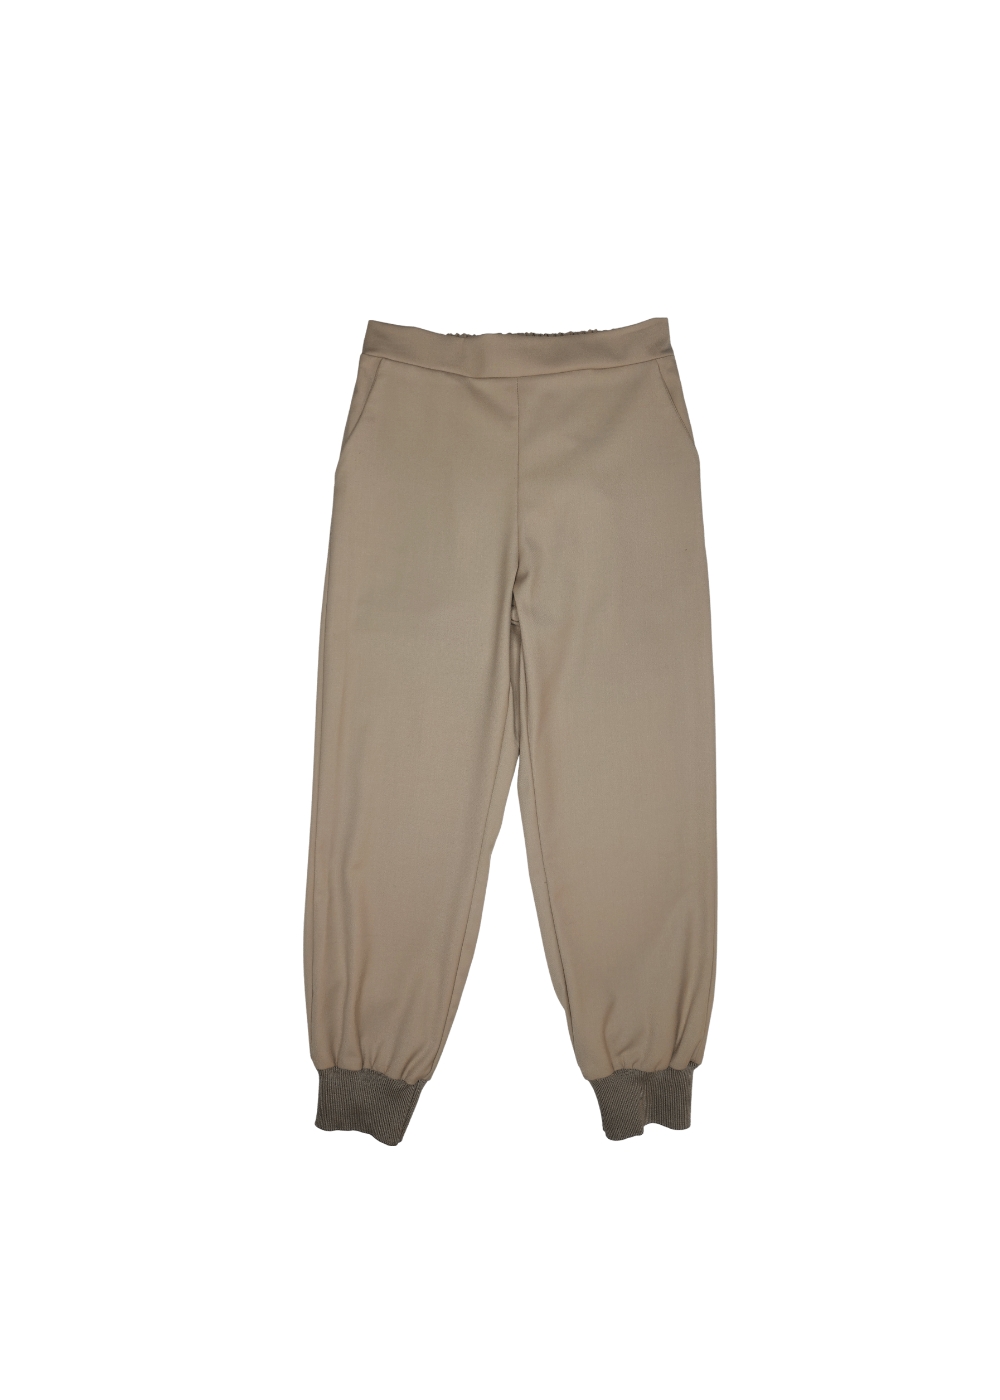 Featured image for “Lù Lù Pantalone Jogger”